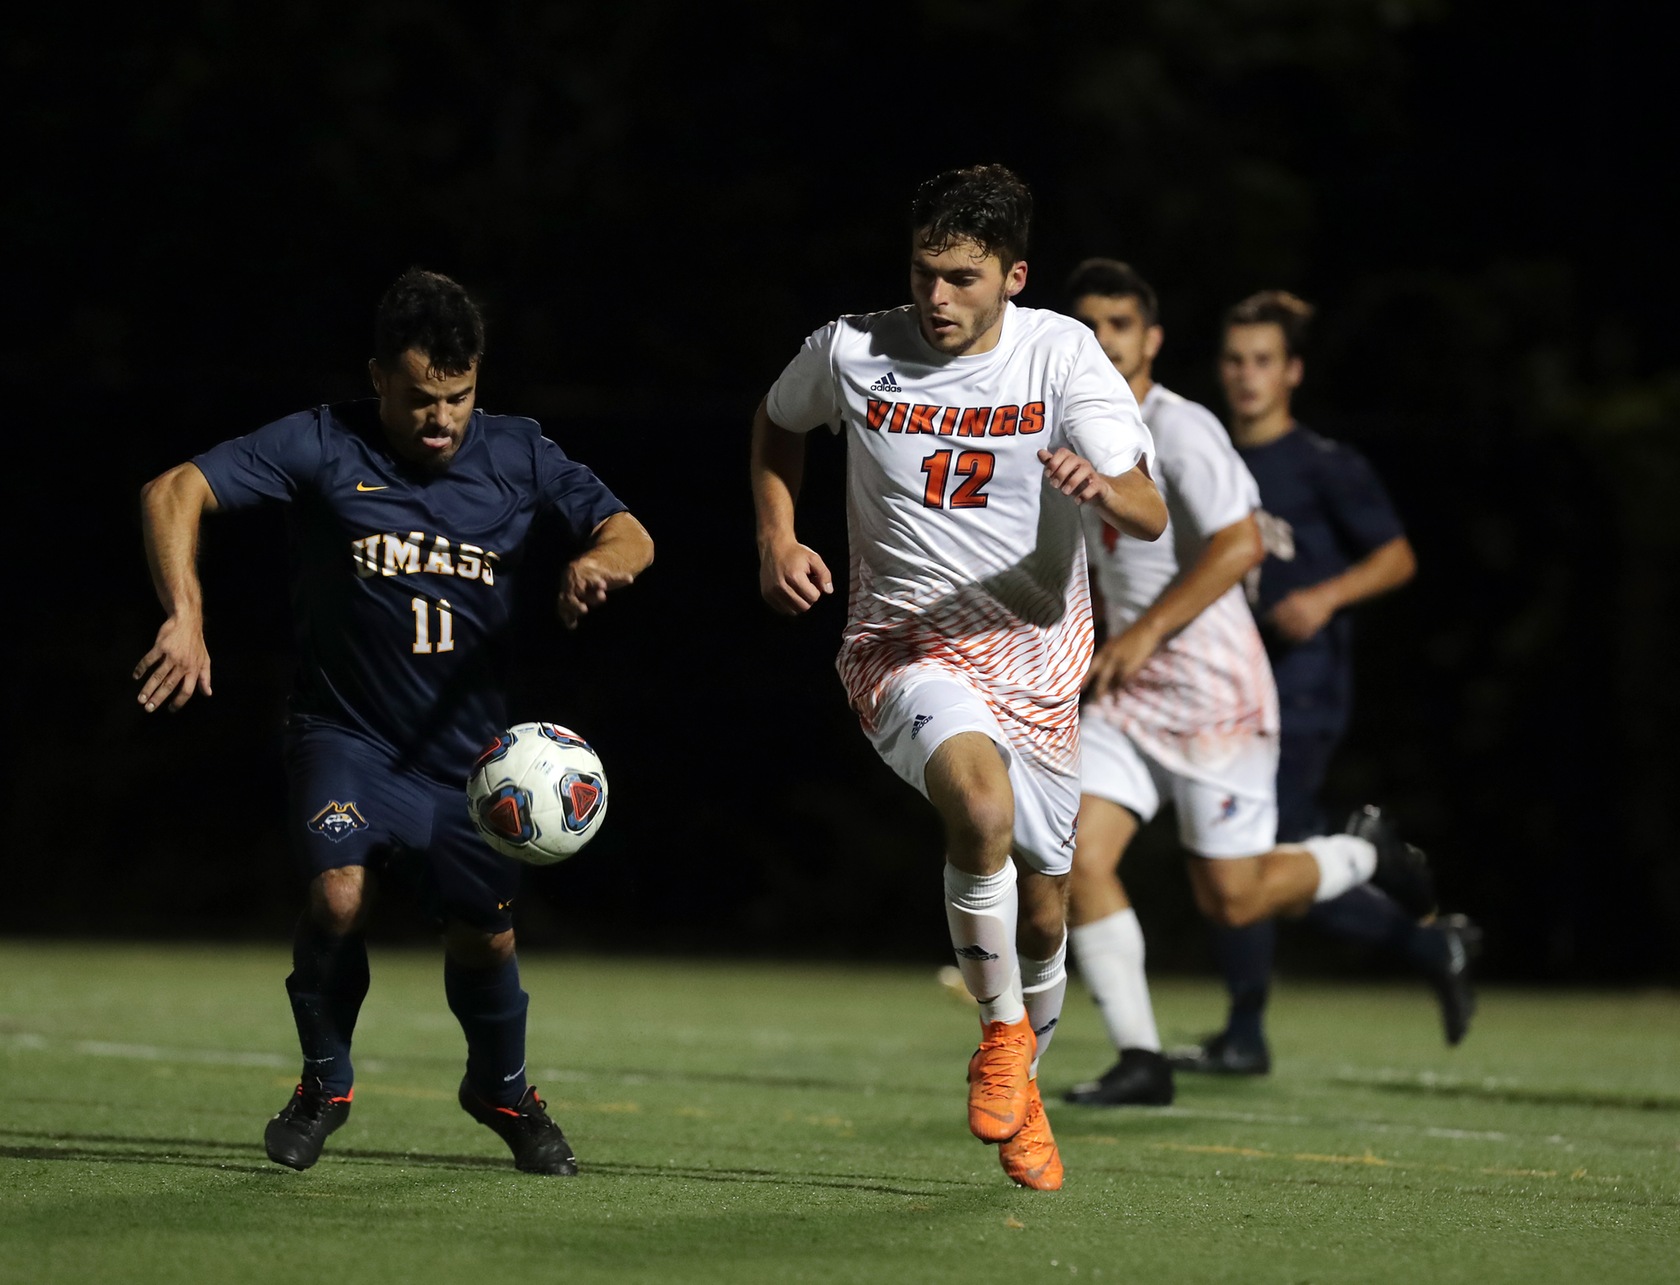 Vikings Blank Mass Maritime, 1-0, to Remain Undefeated in League Action